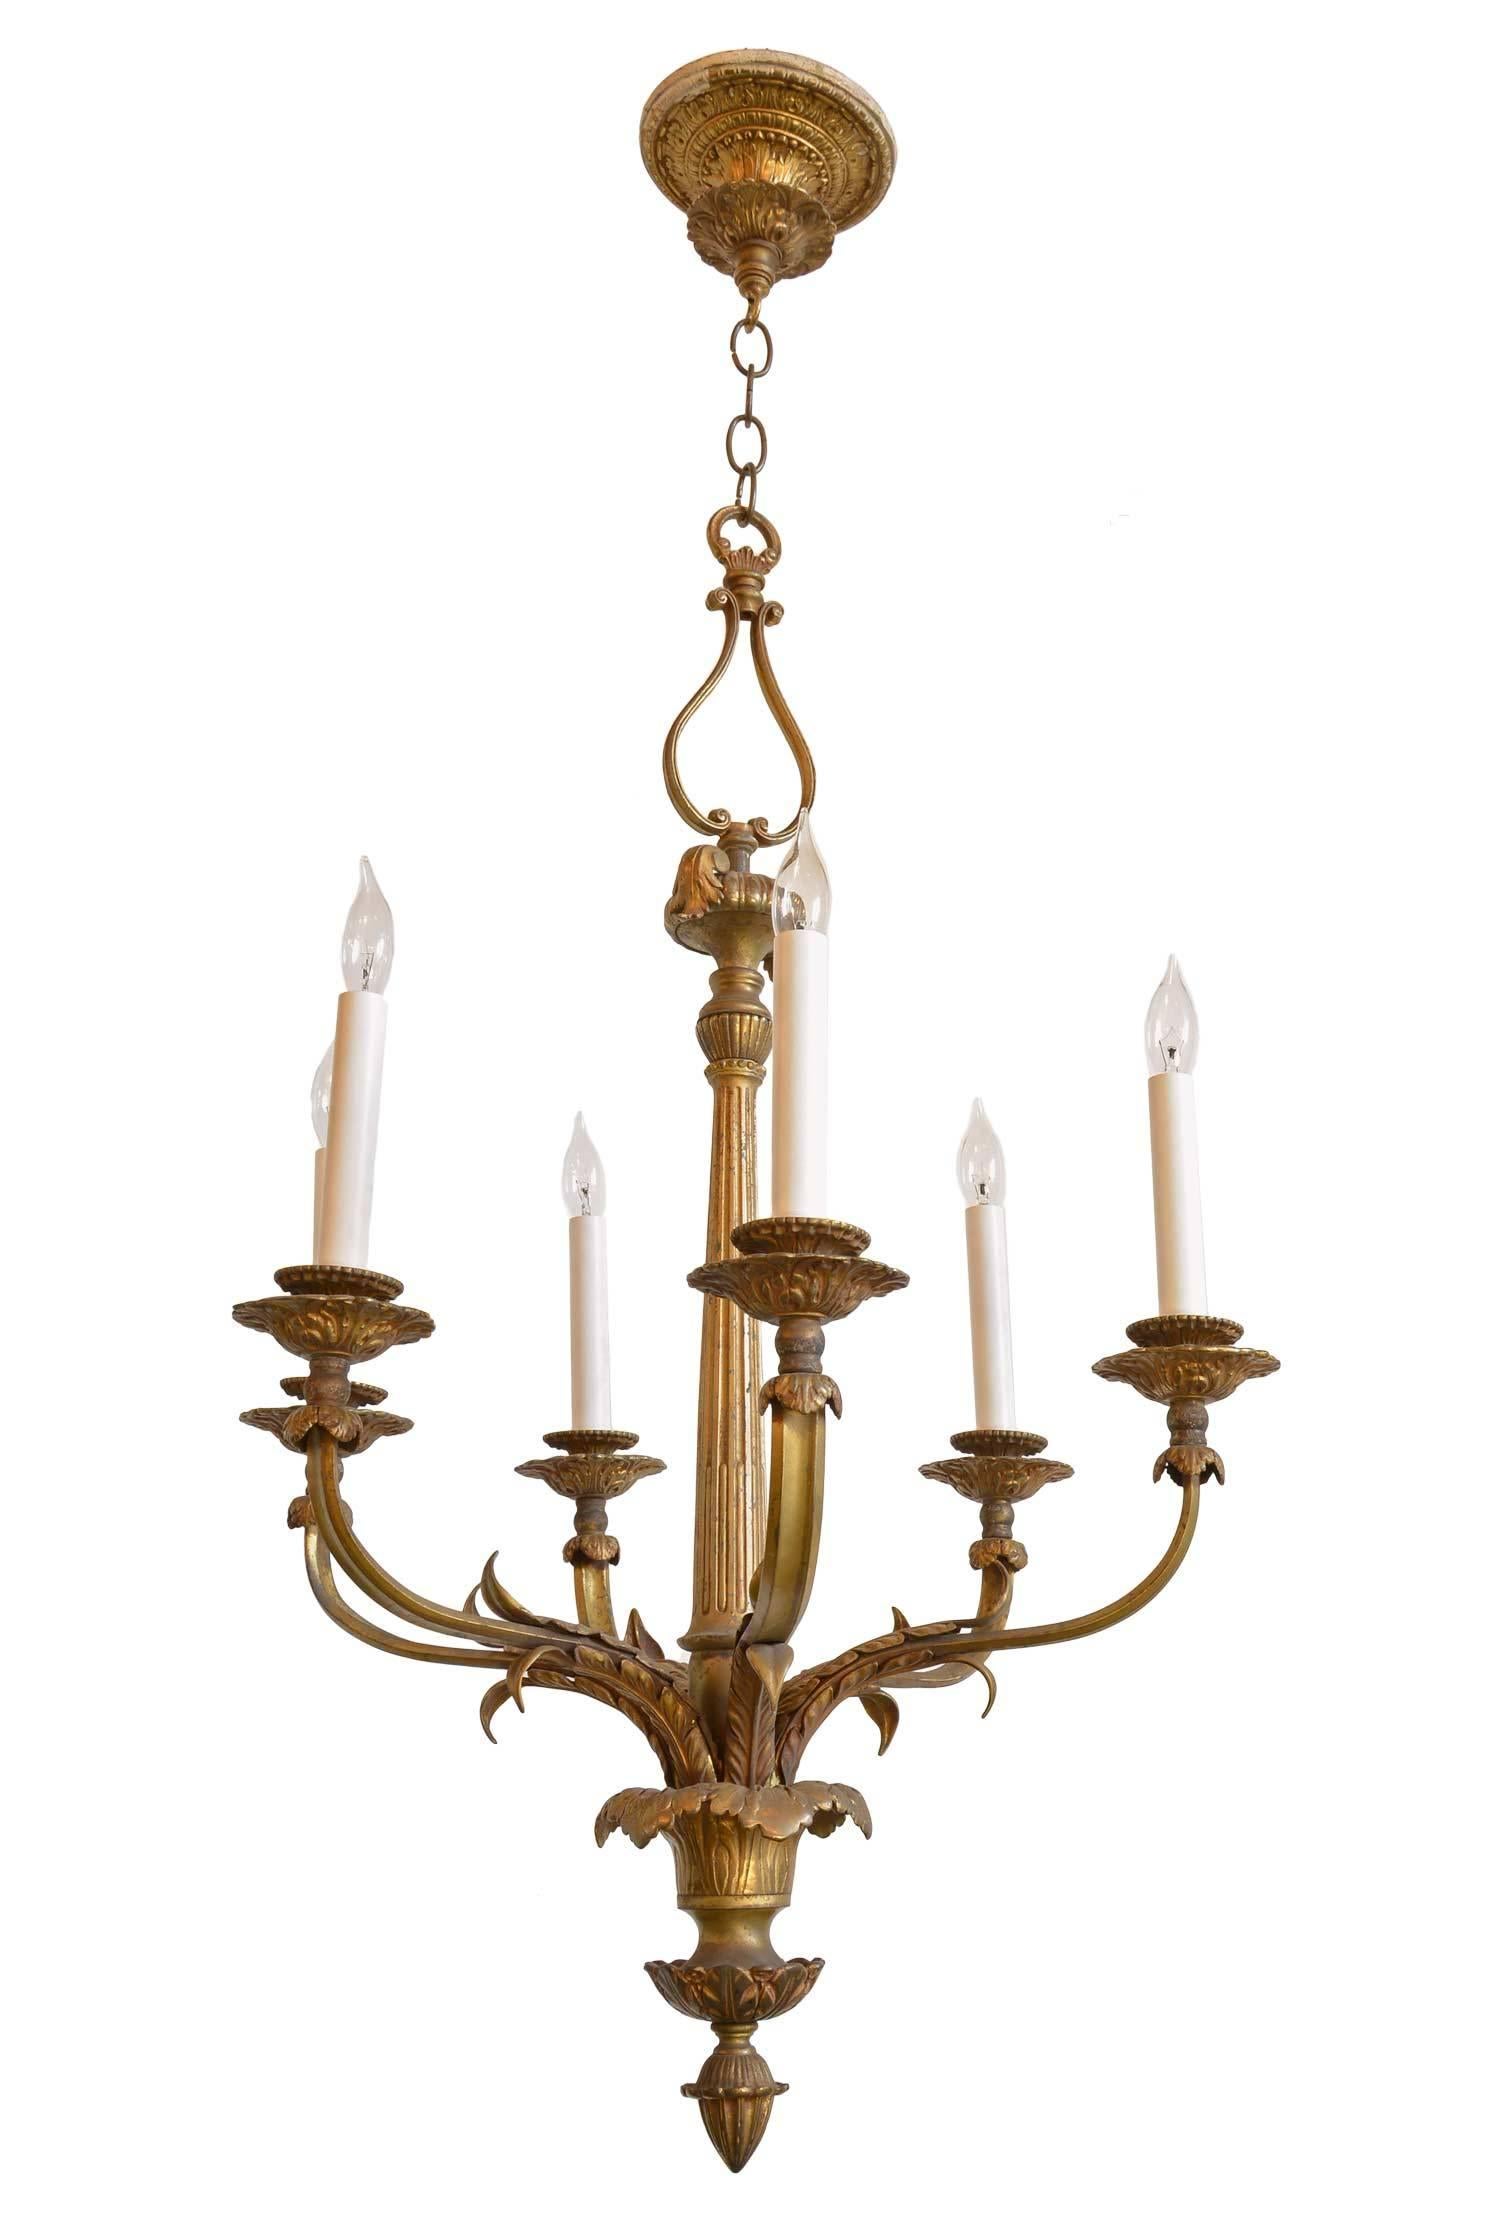 Early 20th Century Bronze Six-Candle Chandelier with Acanthus Leaf